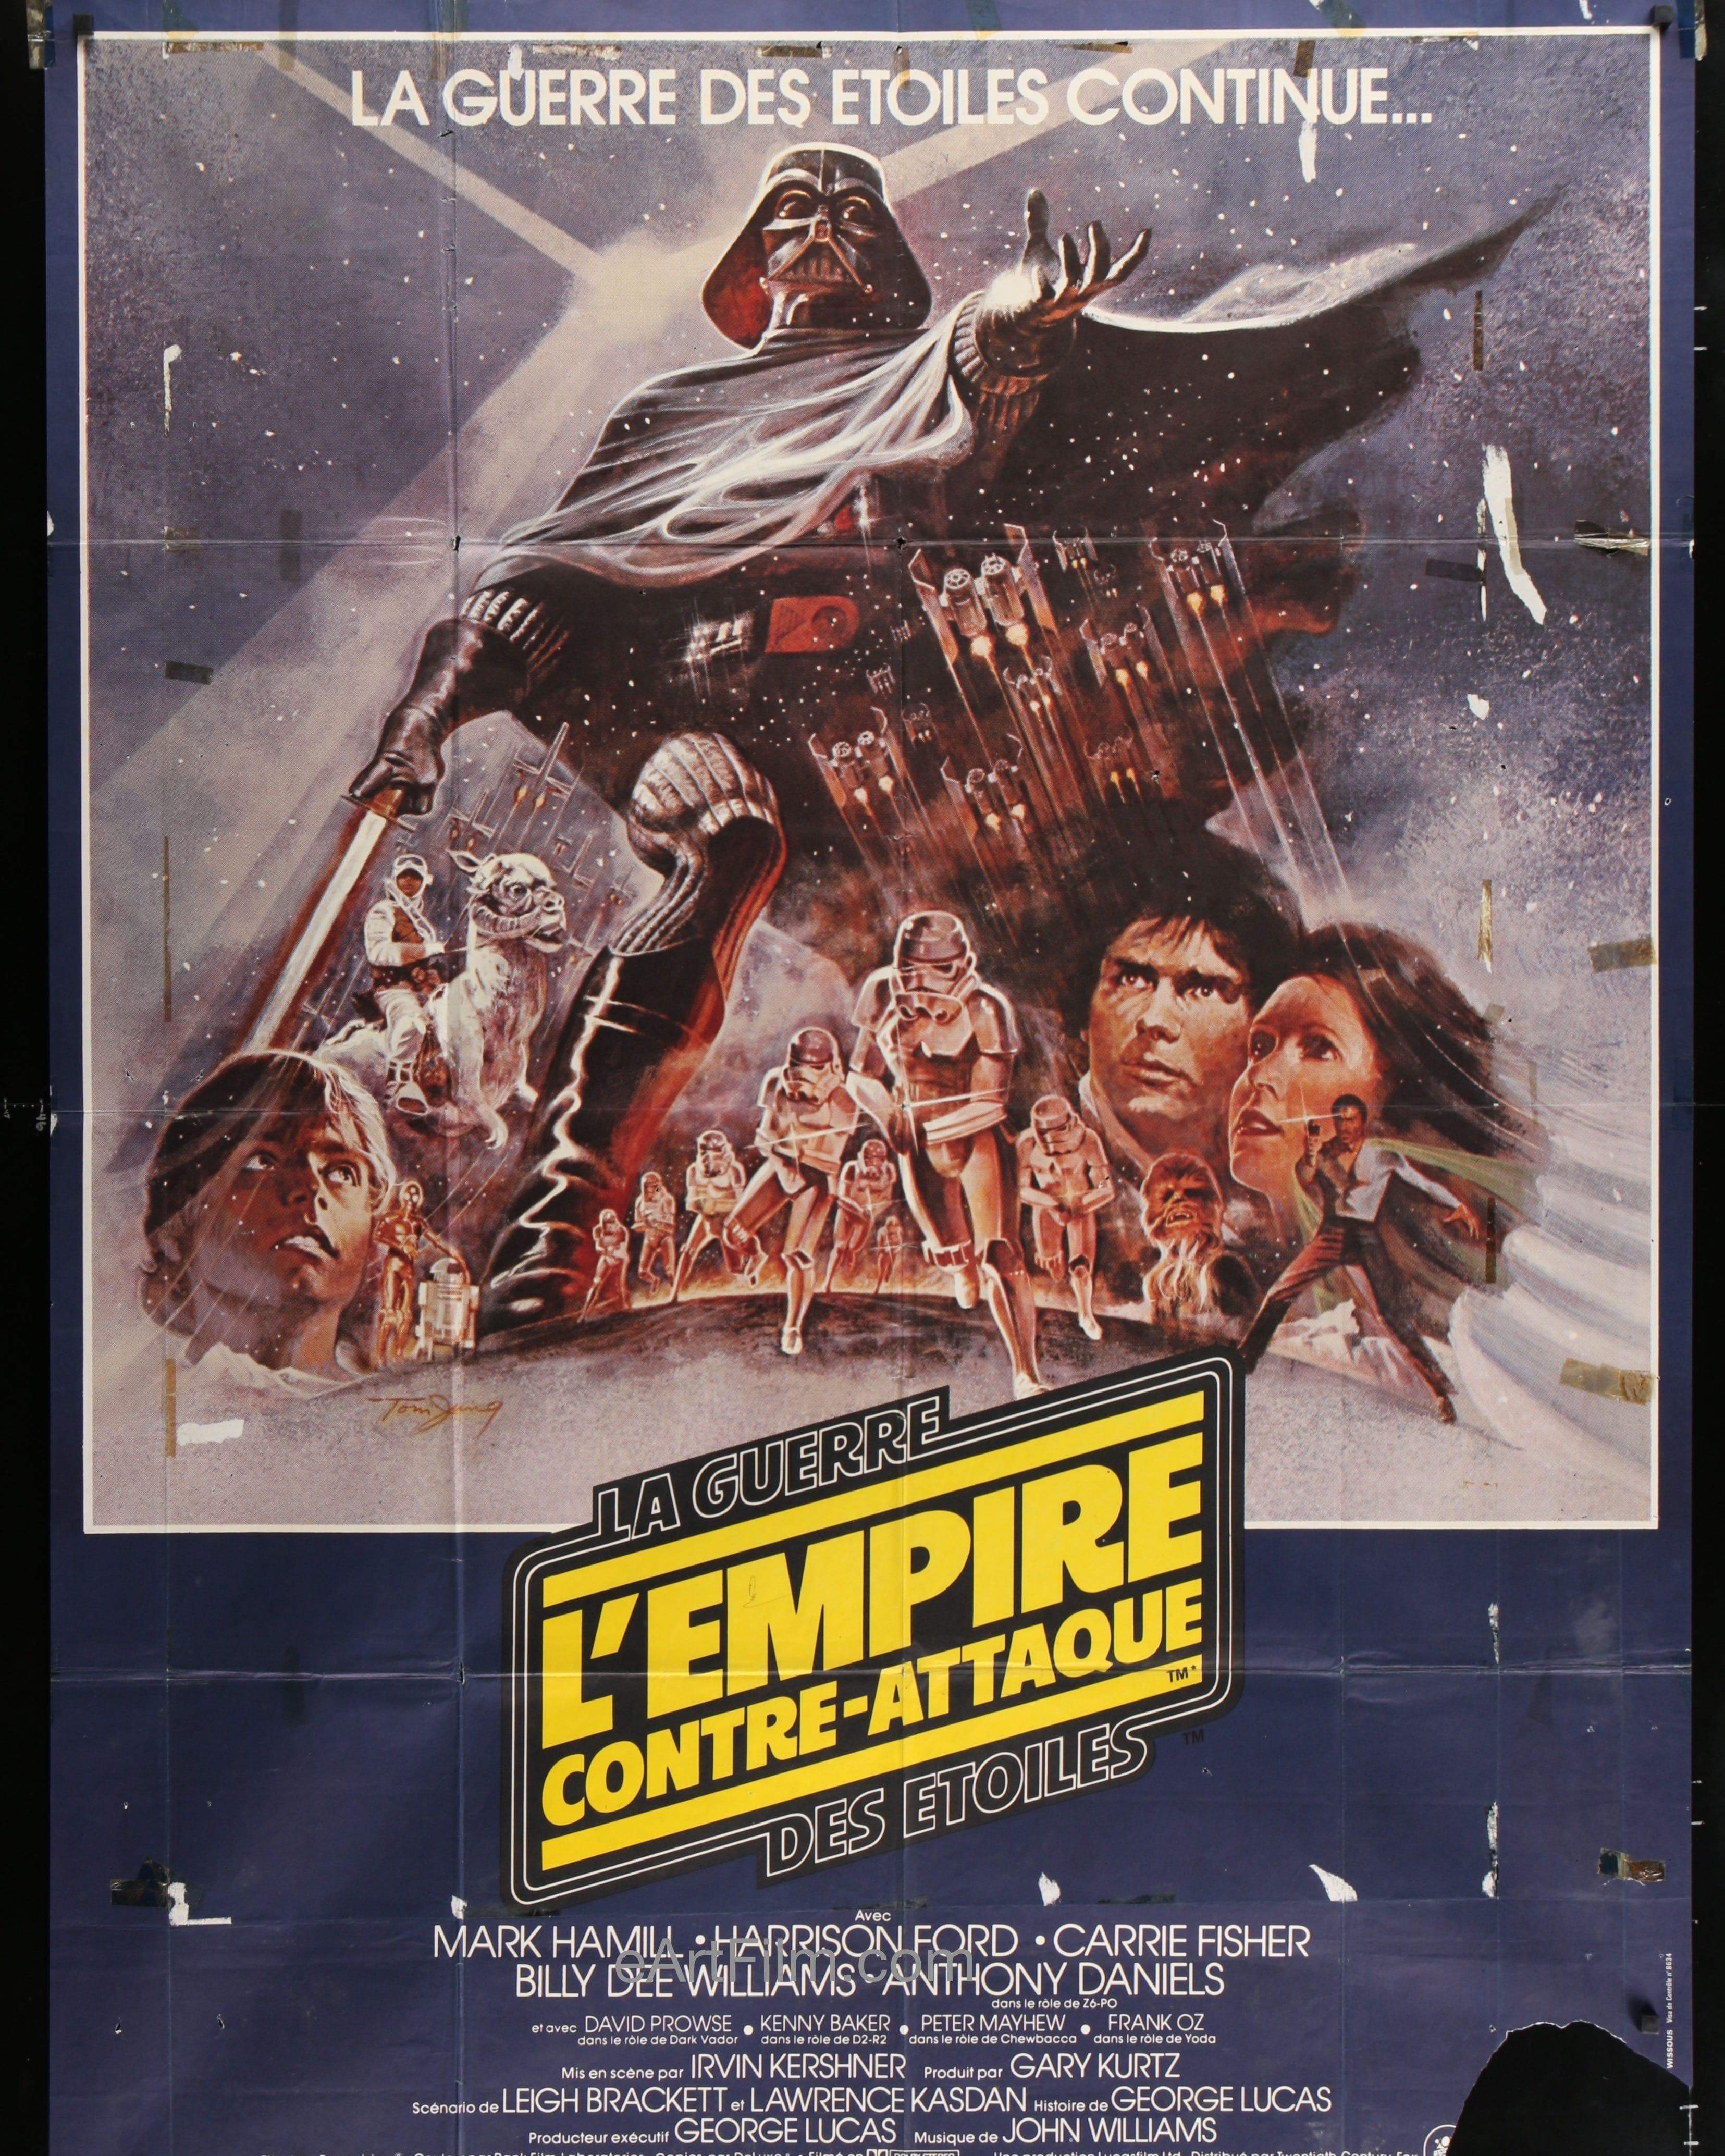 The Empire Strikes Back Movie Poster 1980 1 Sheet (27x41)